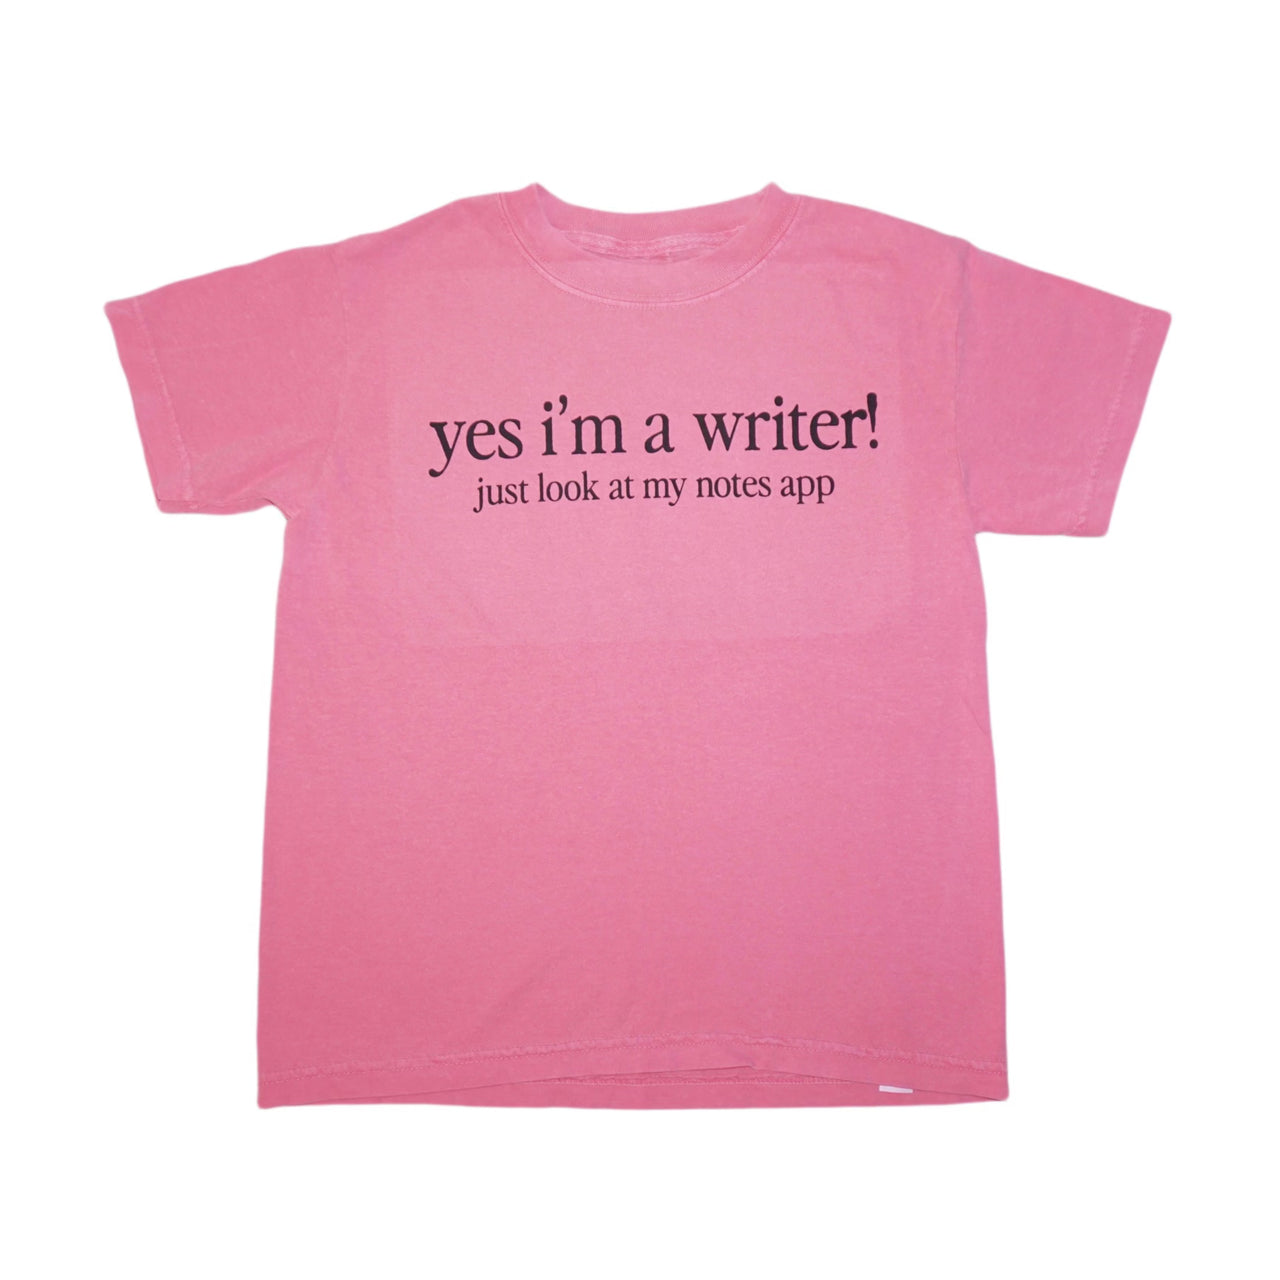 yes i'm a writer! just look at my notes app tee